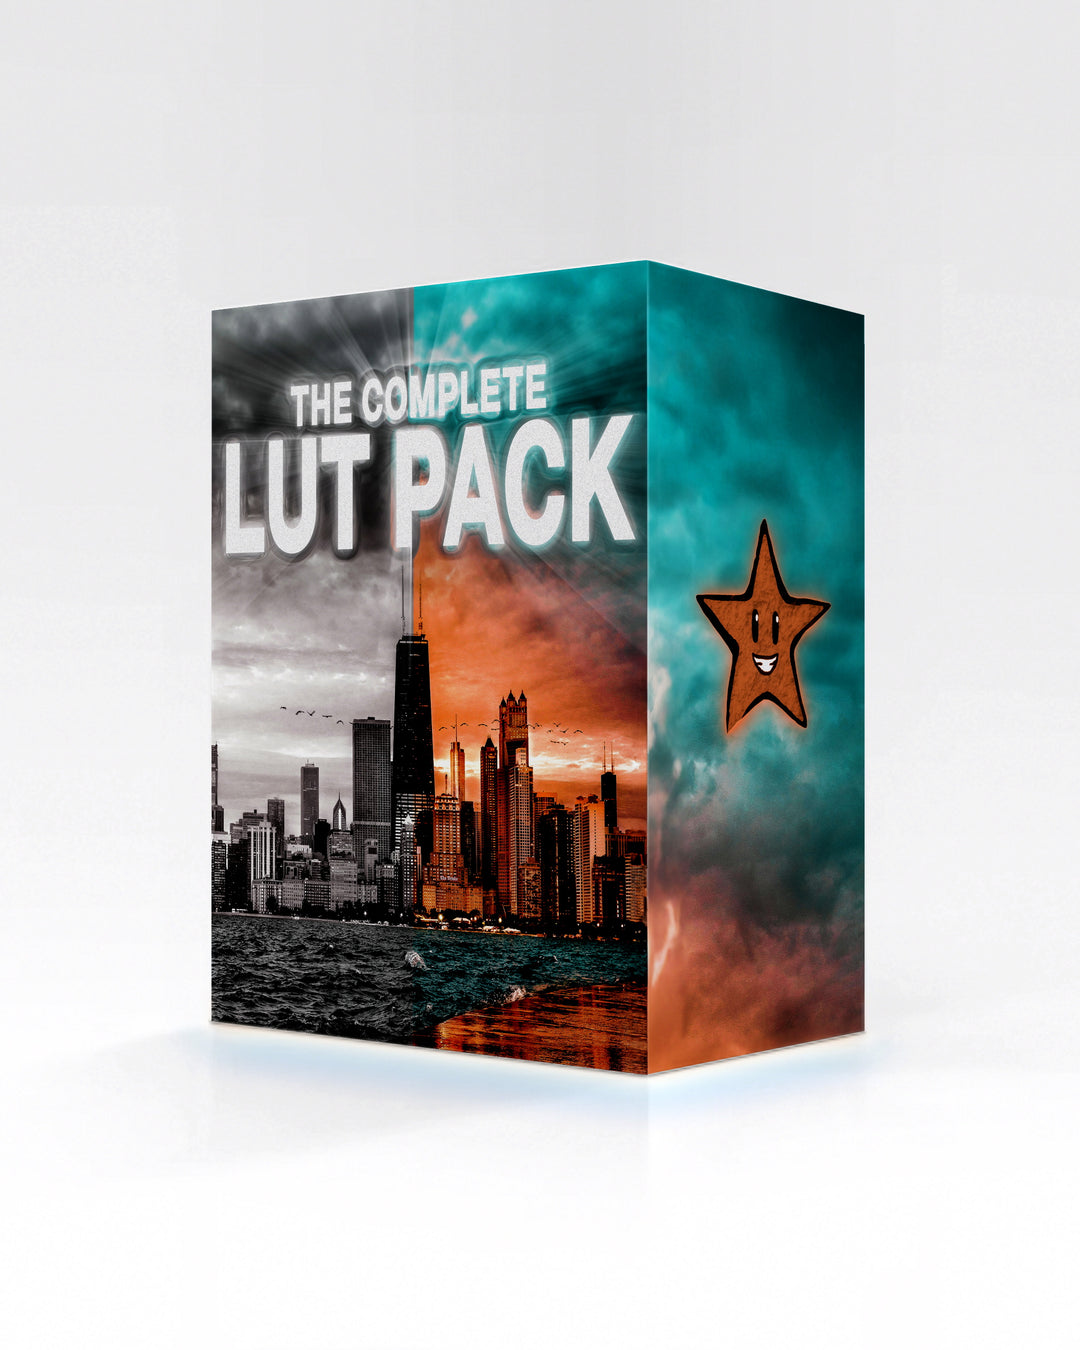 The Complete LUT Pack (500 LUTS)